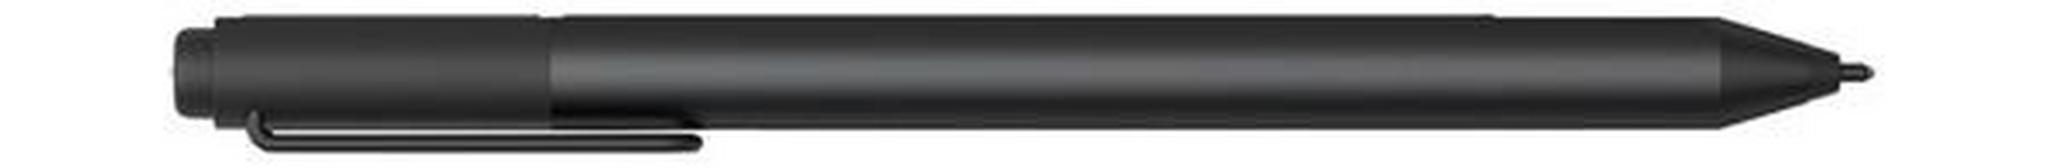 Microsoft Surface Pen for Surface Pro 4 - Black